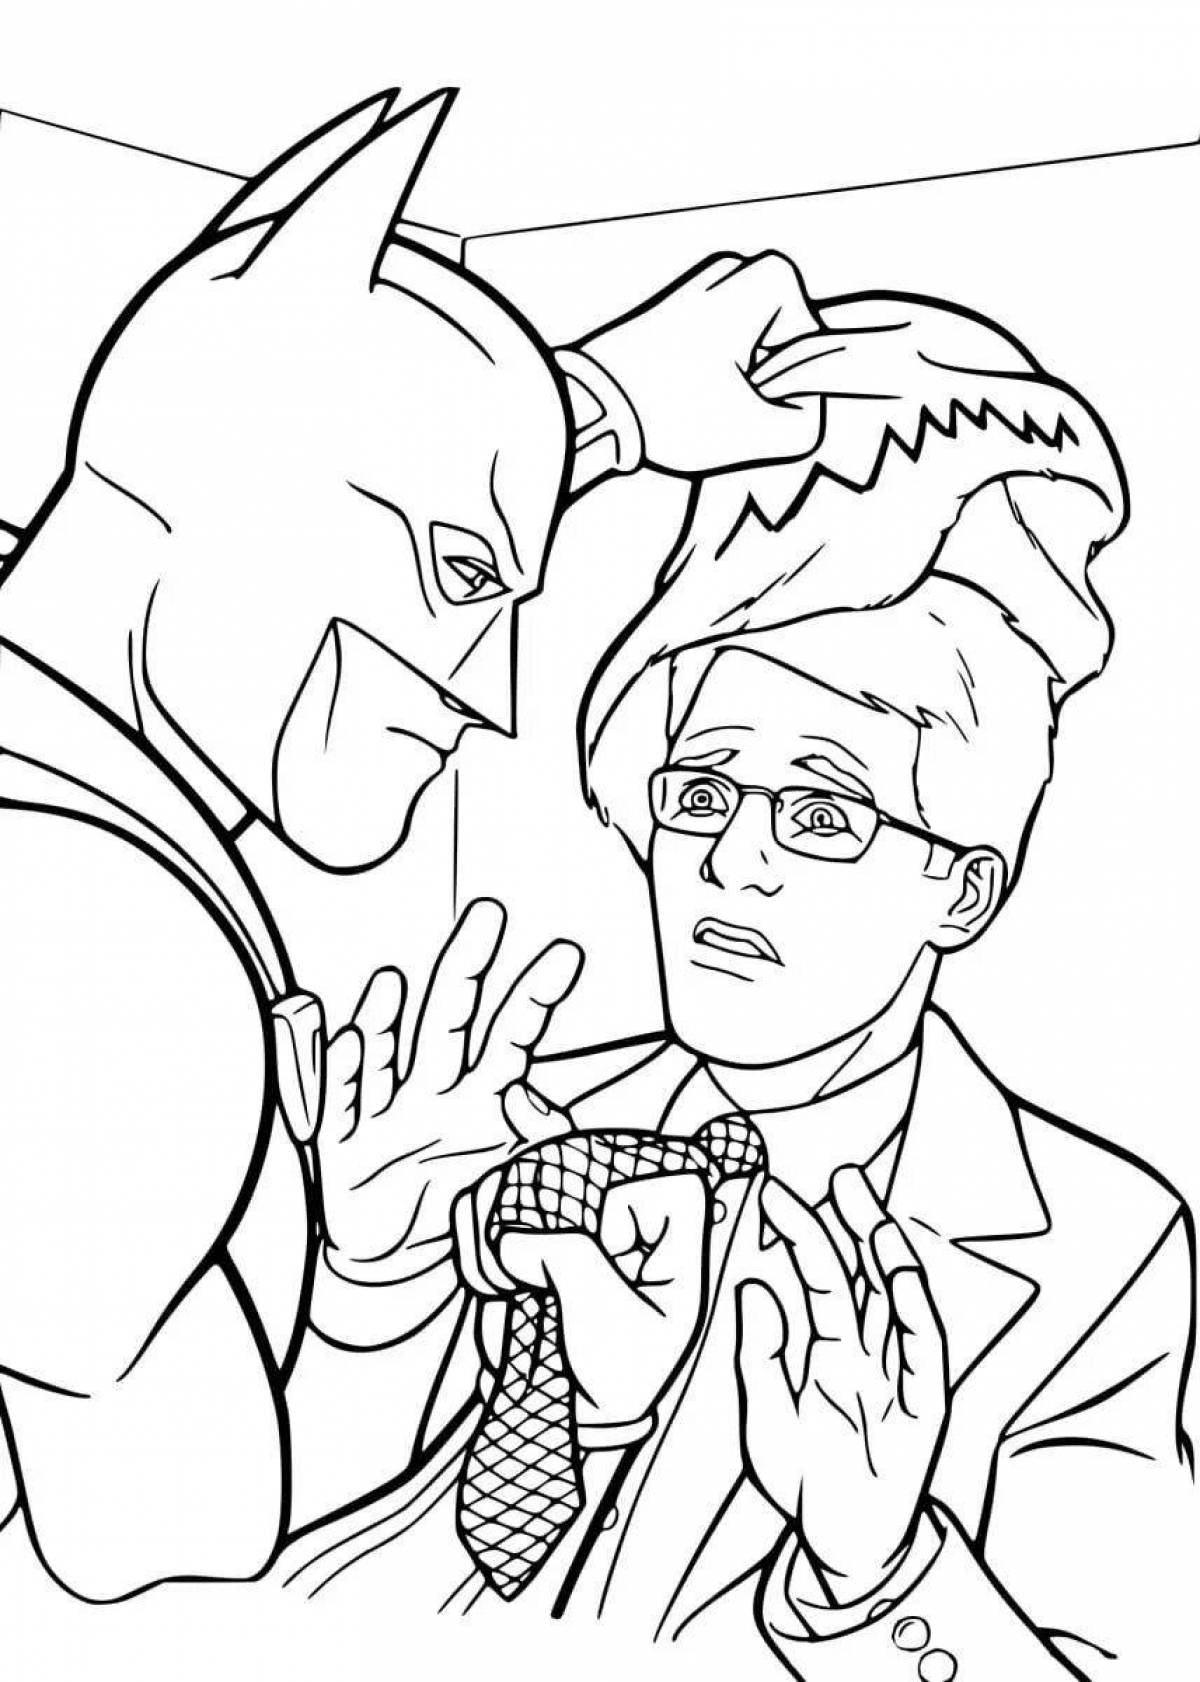 Awesome batman and joker coloring pages